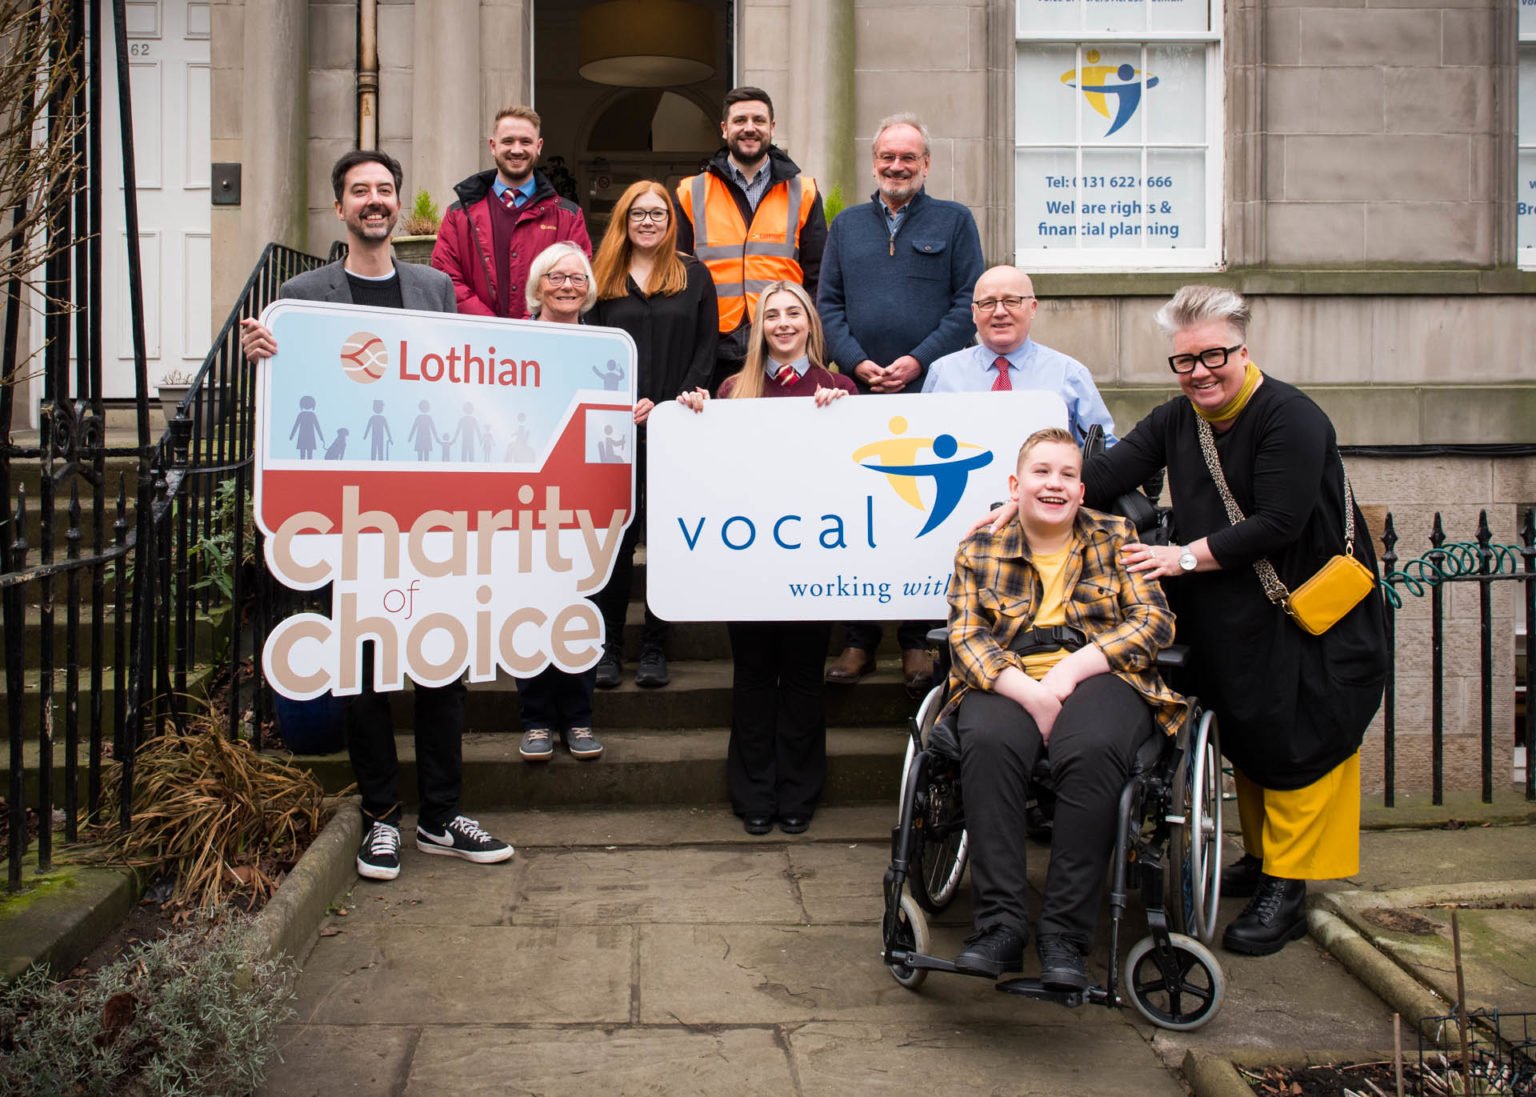 vocal employees showcasing charity choice banner